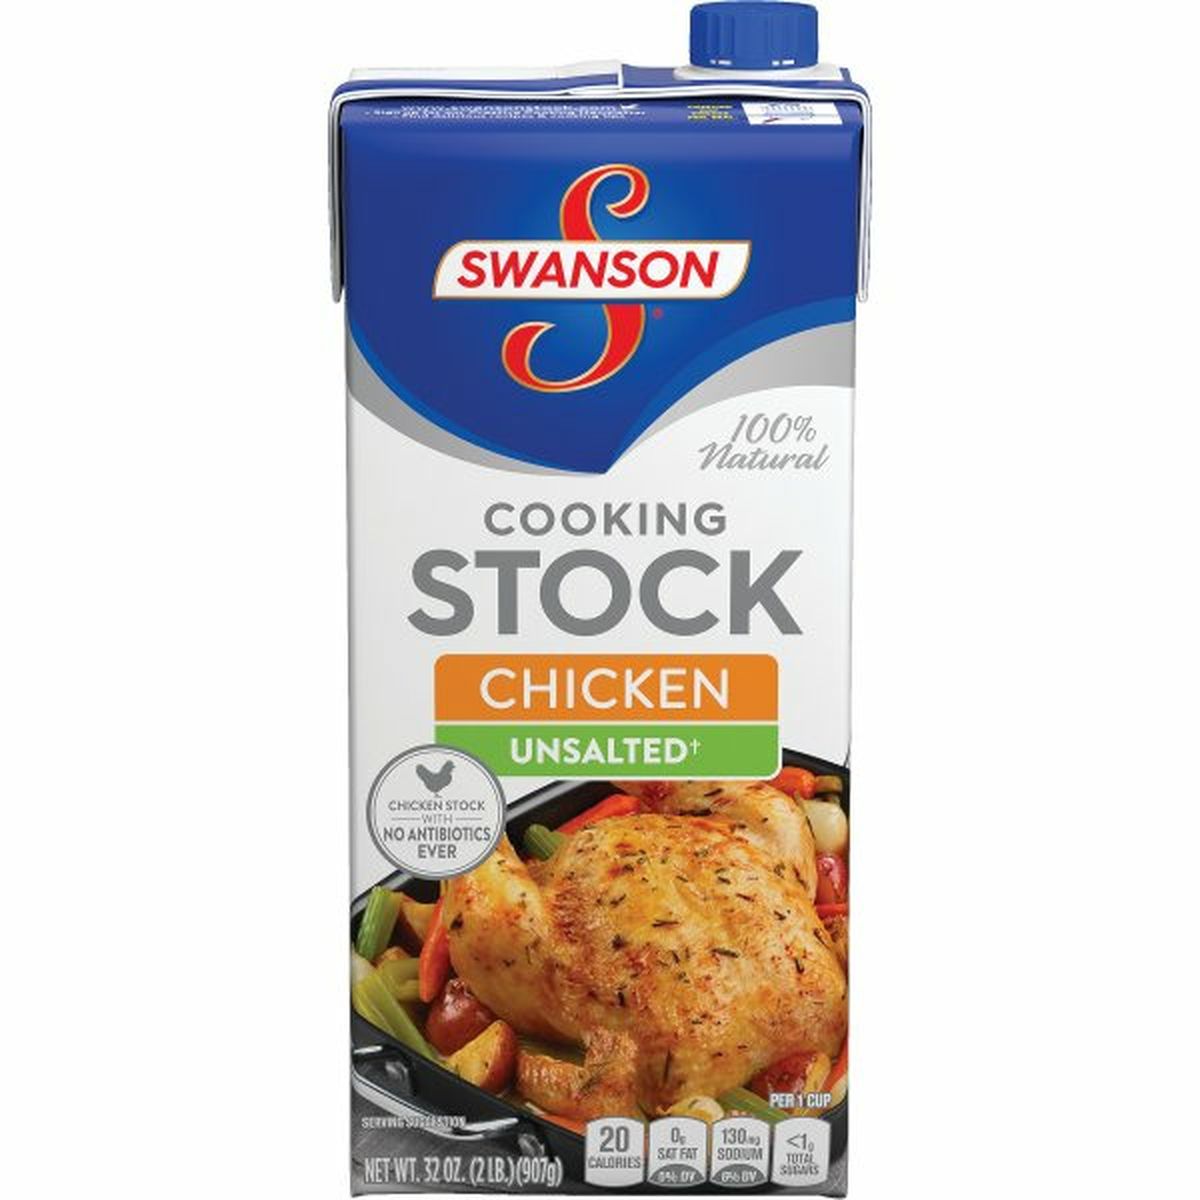 Calories in Swansons Unsalted Chicken Stock